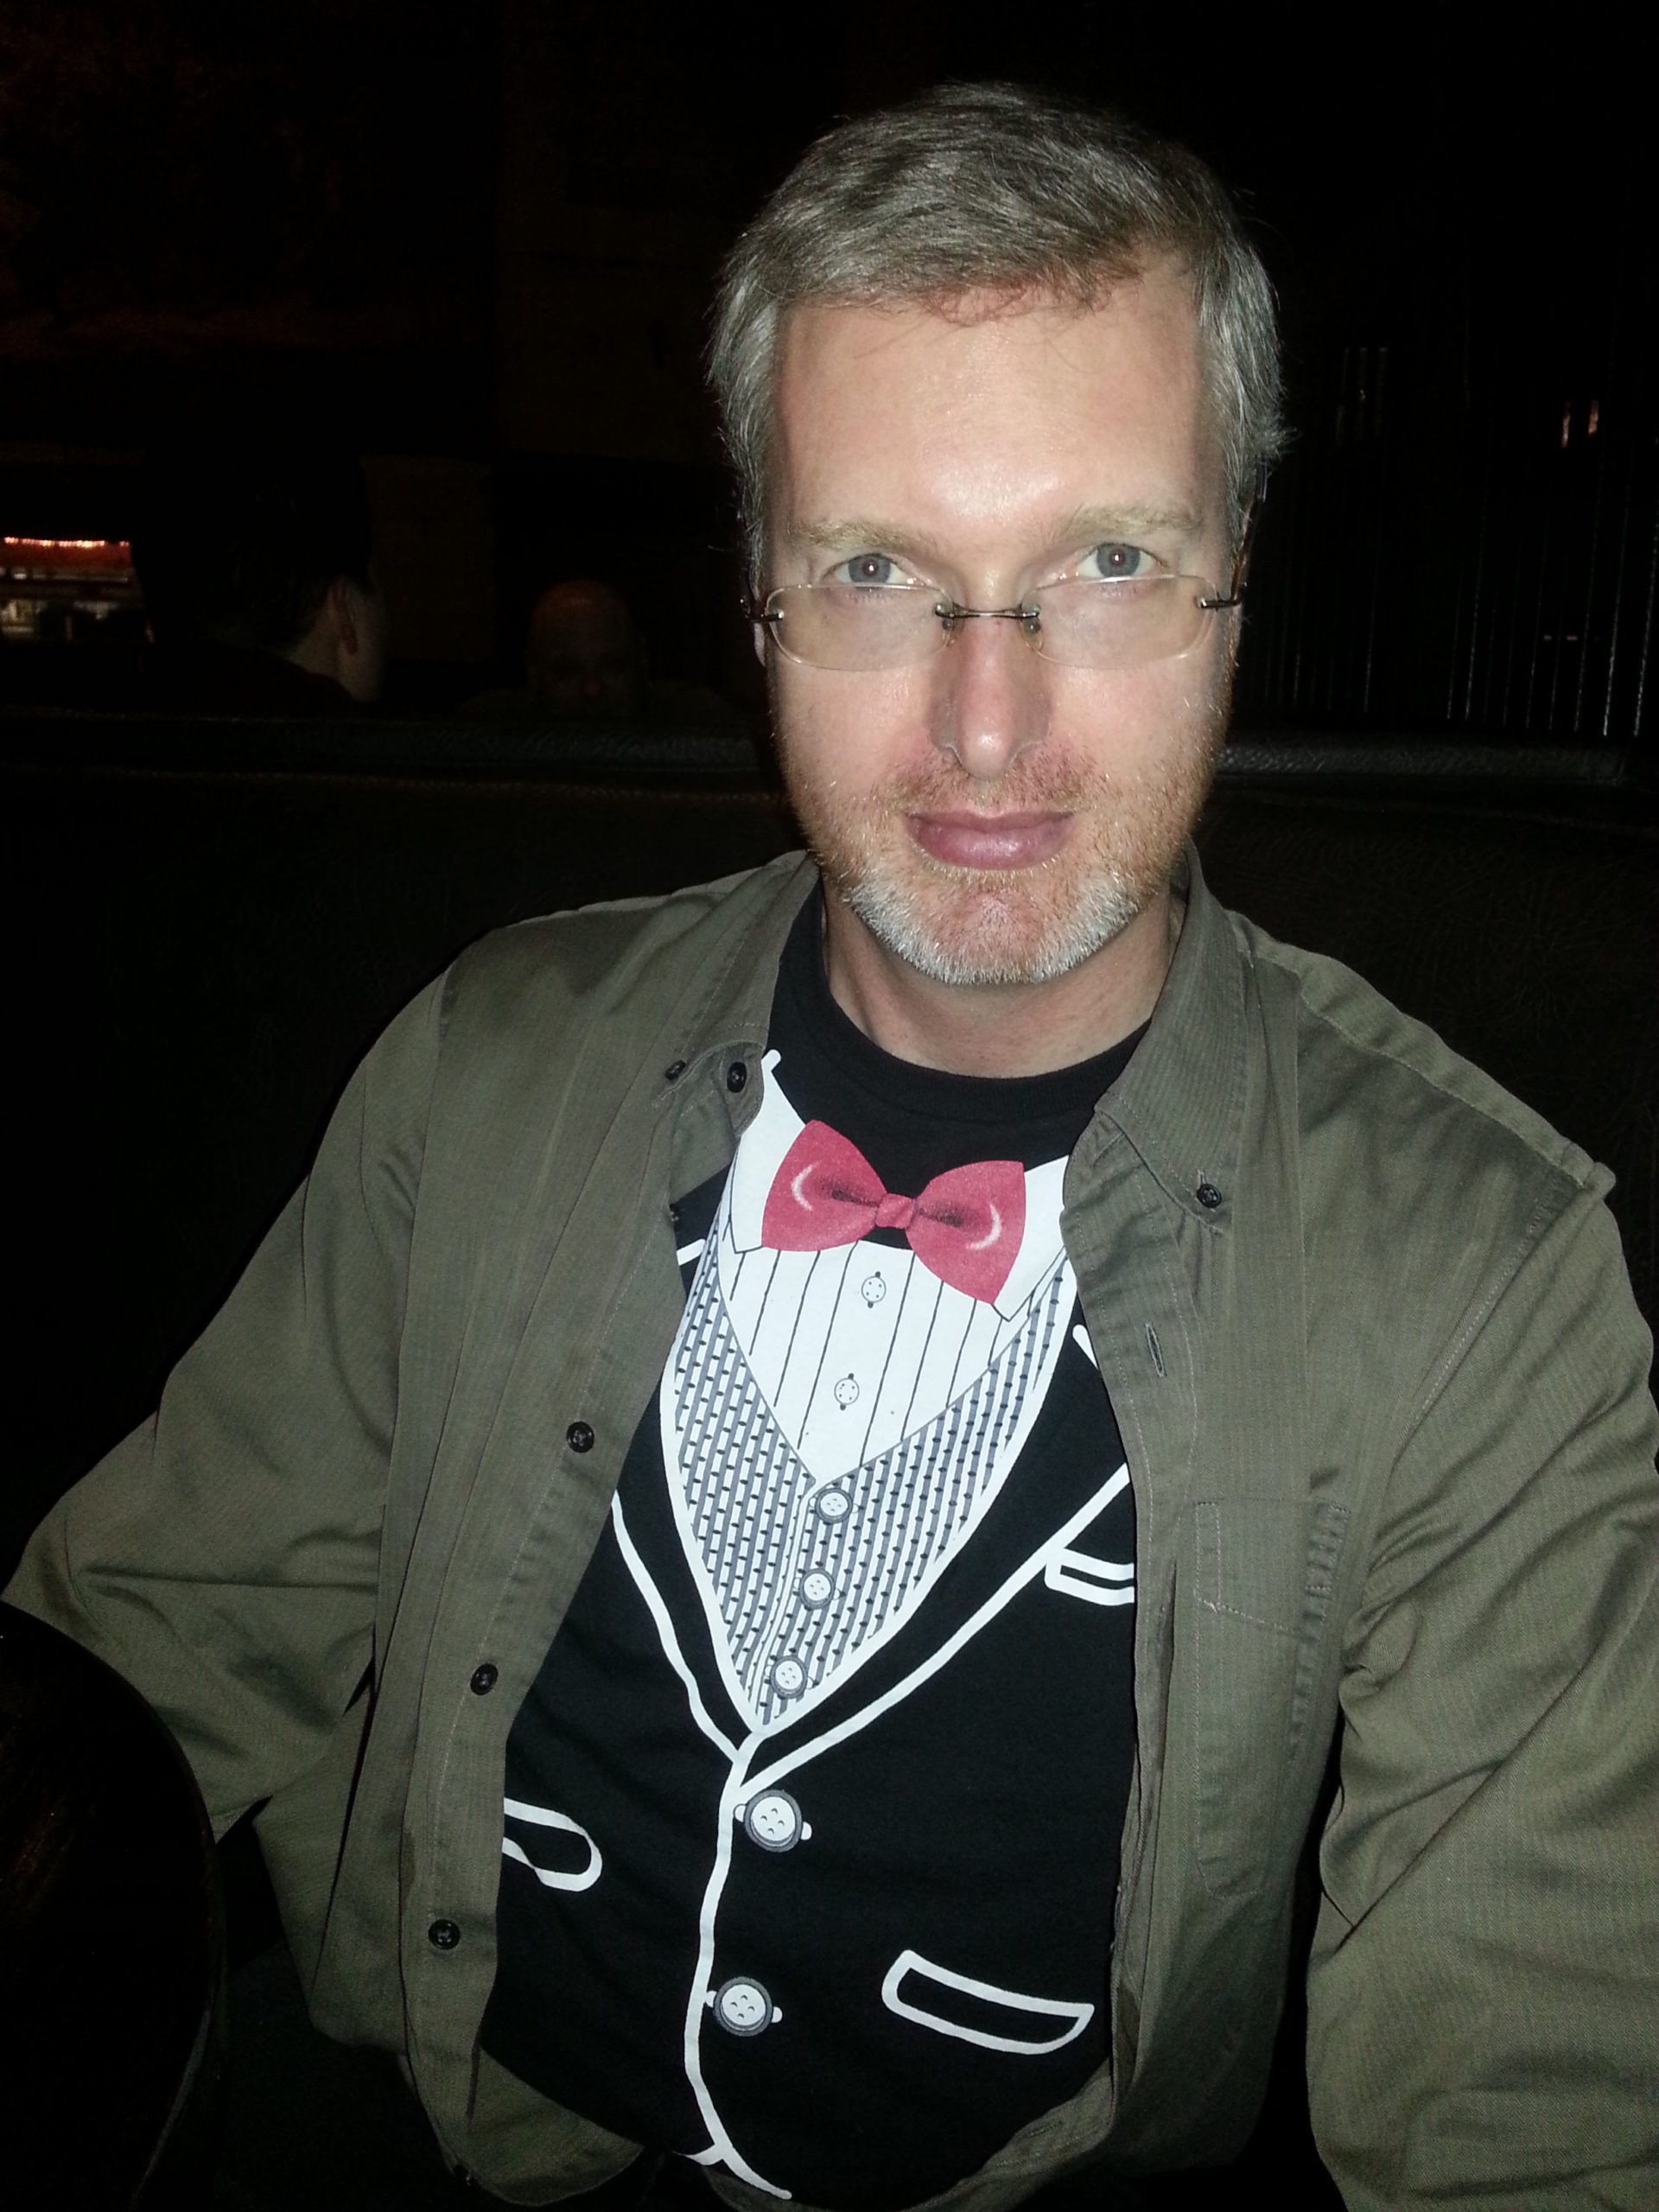 Brian snuck the tuxedo tee-shirt to dinner and revealed it when I least expected it. As if you didn't already love him!